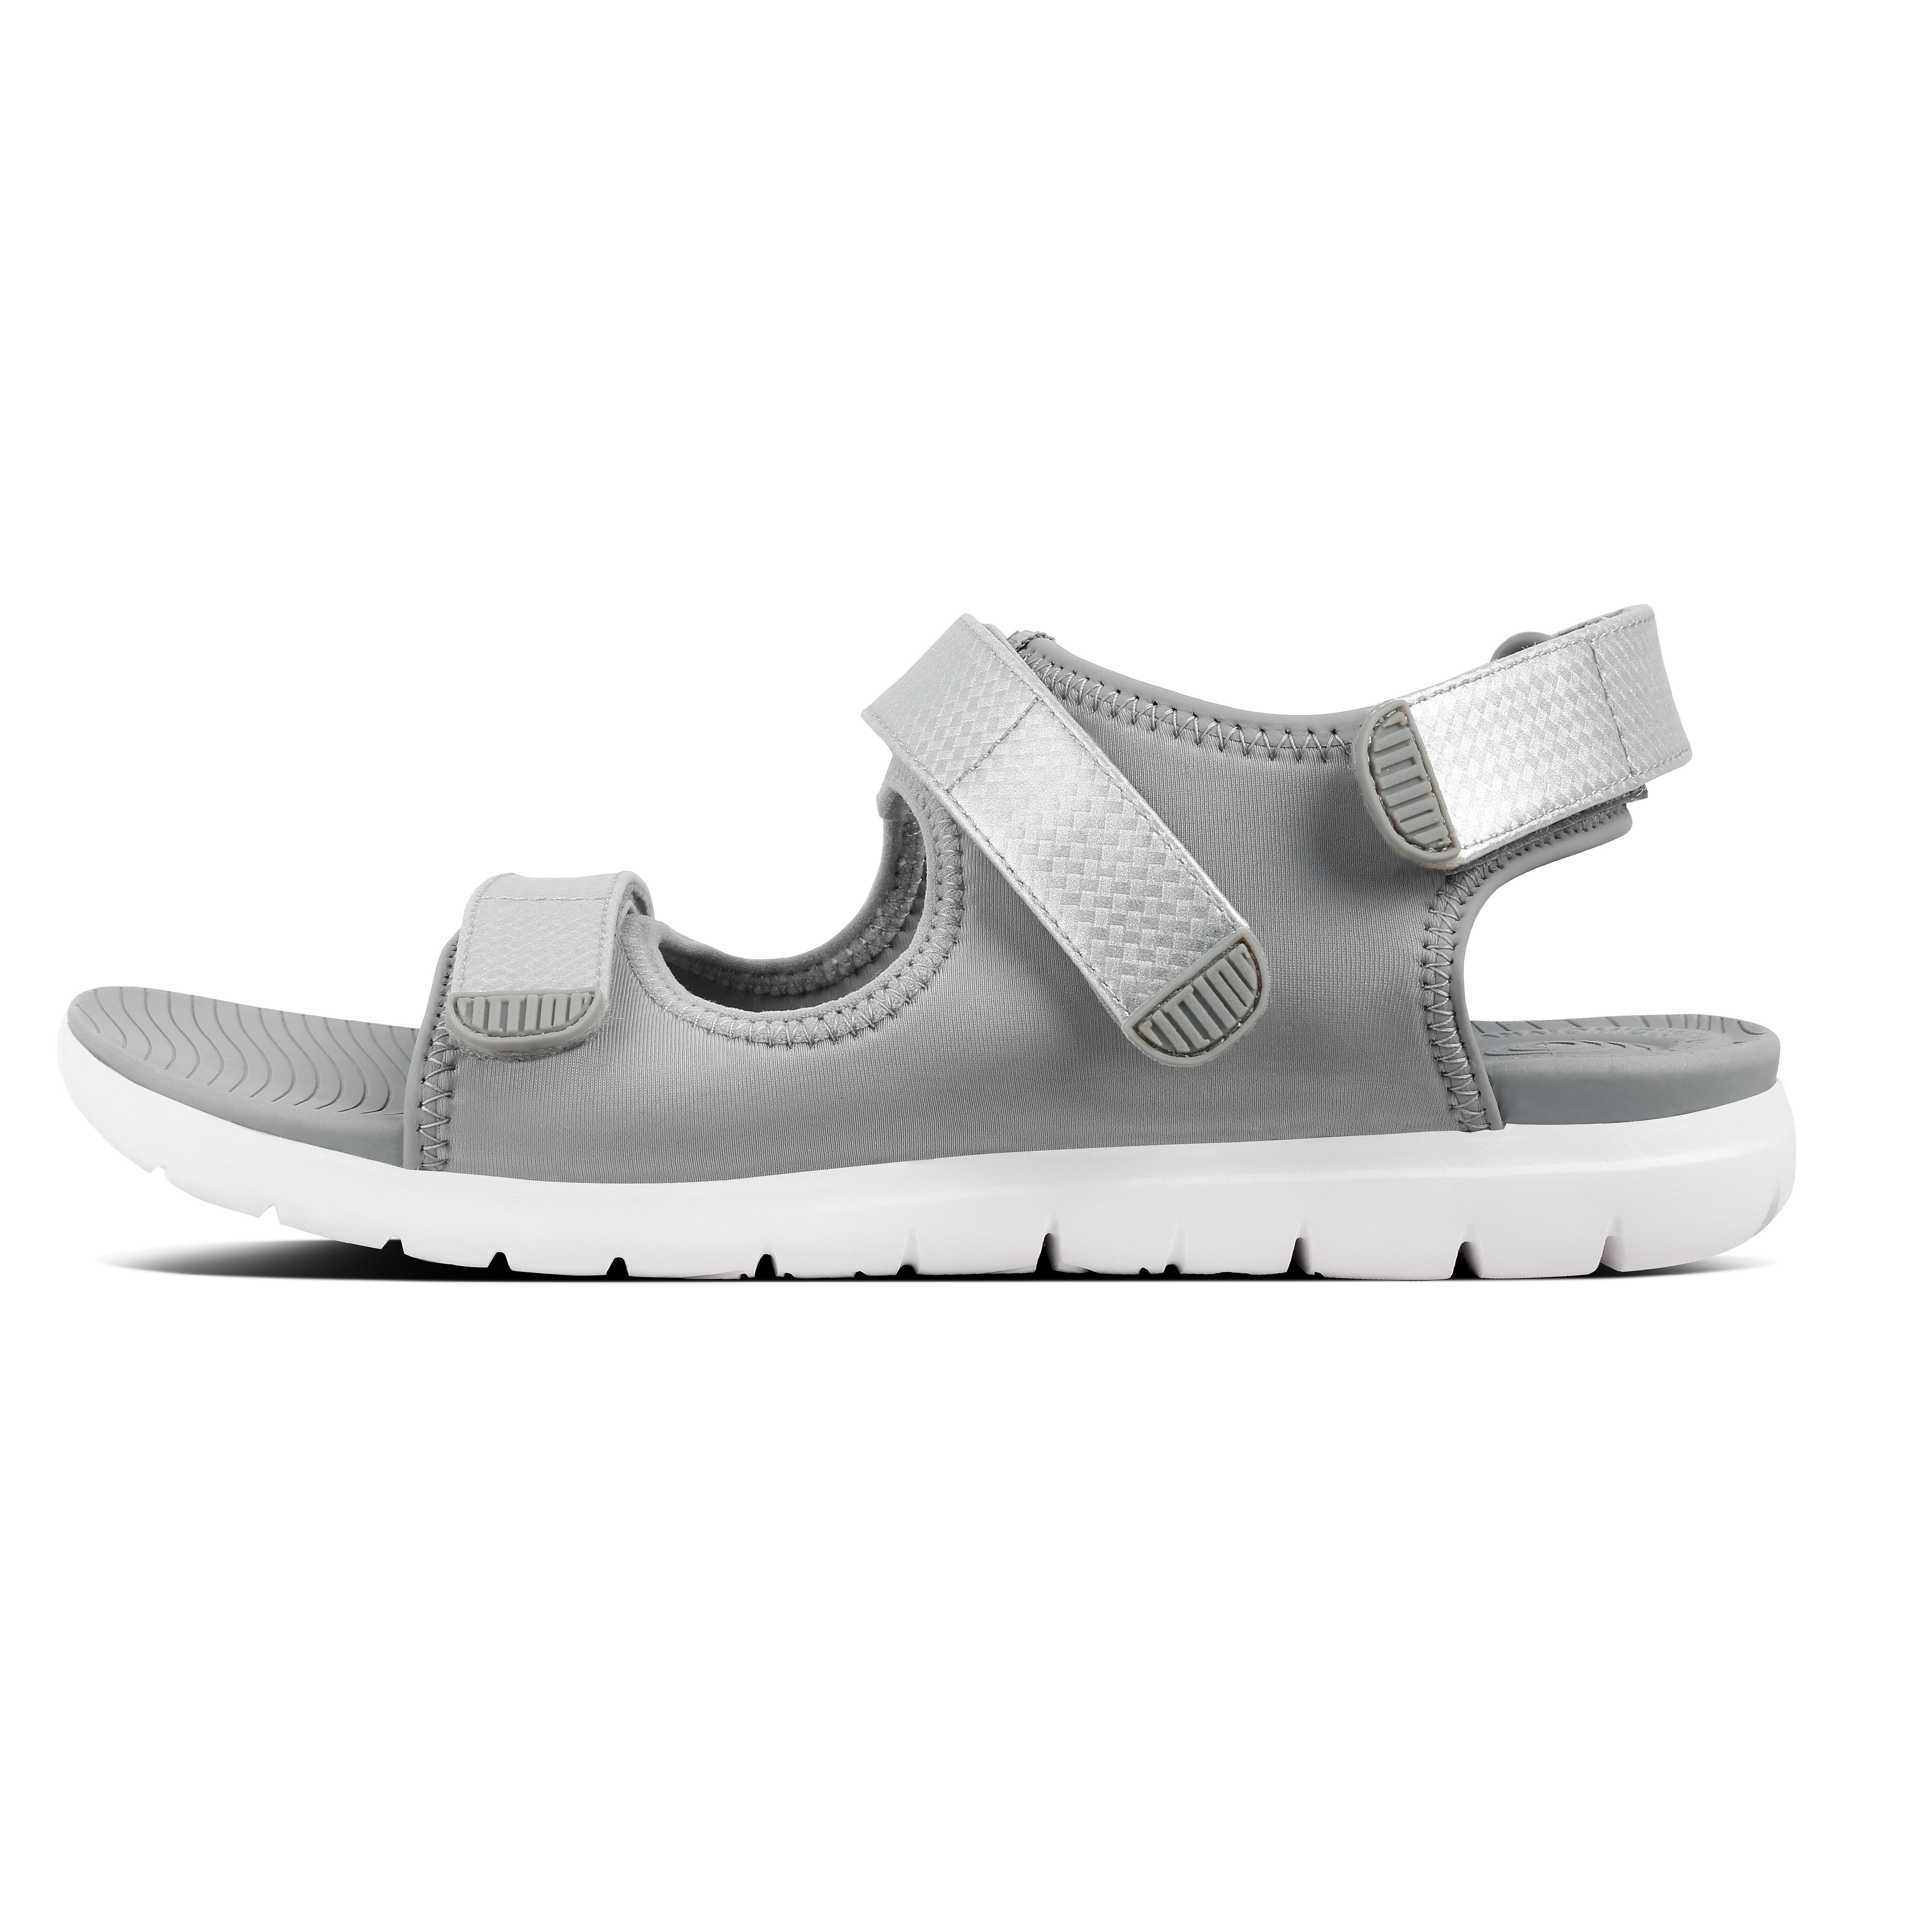 fitflop neoflex back strap sandals